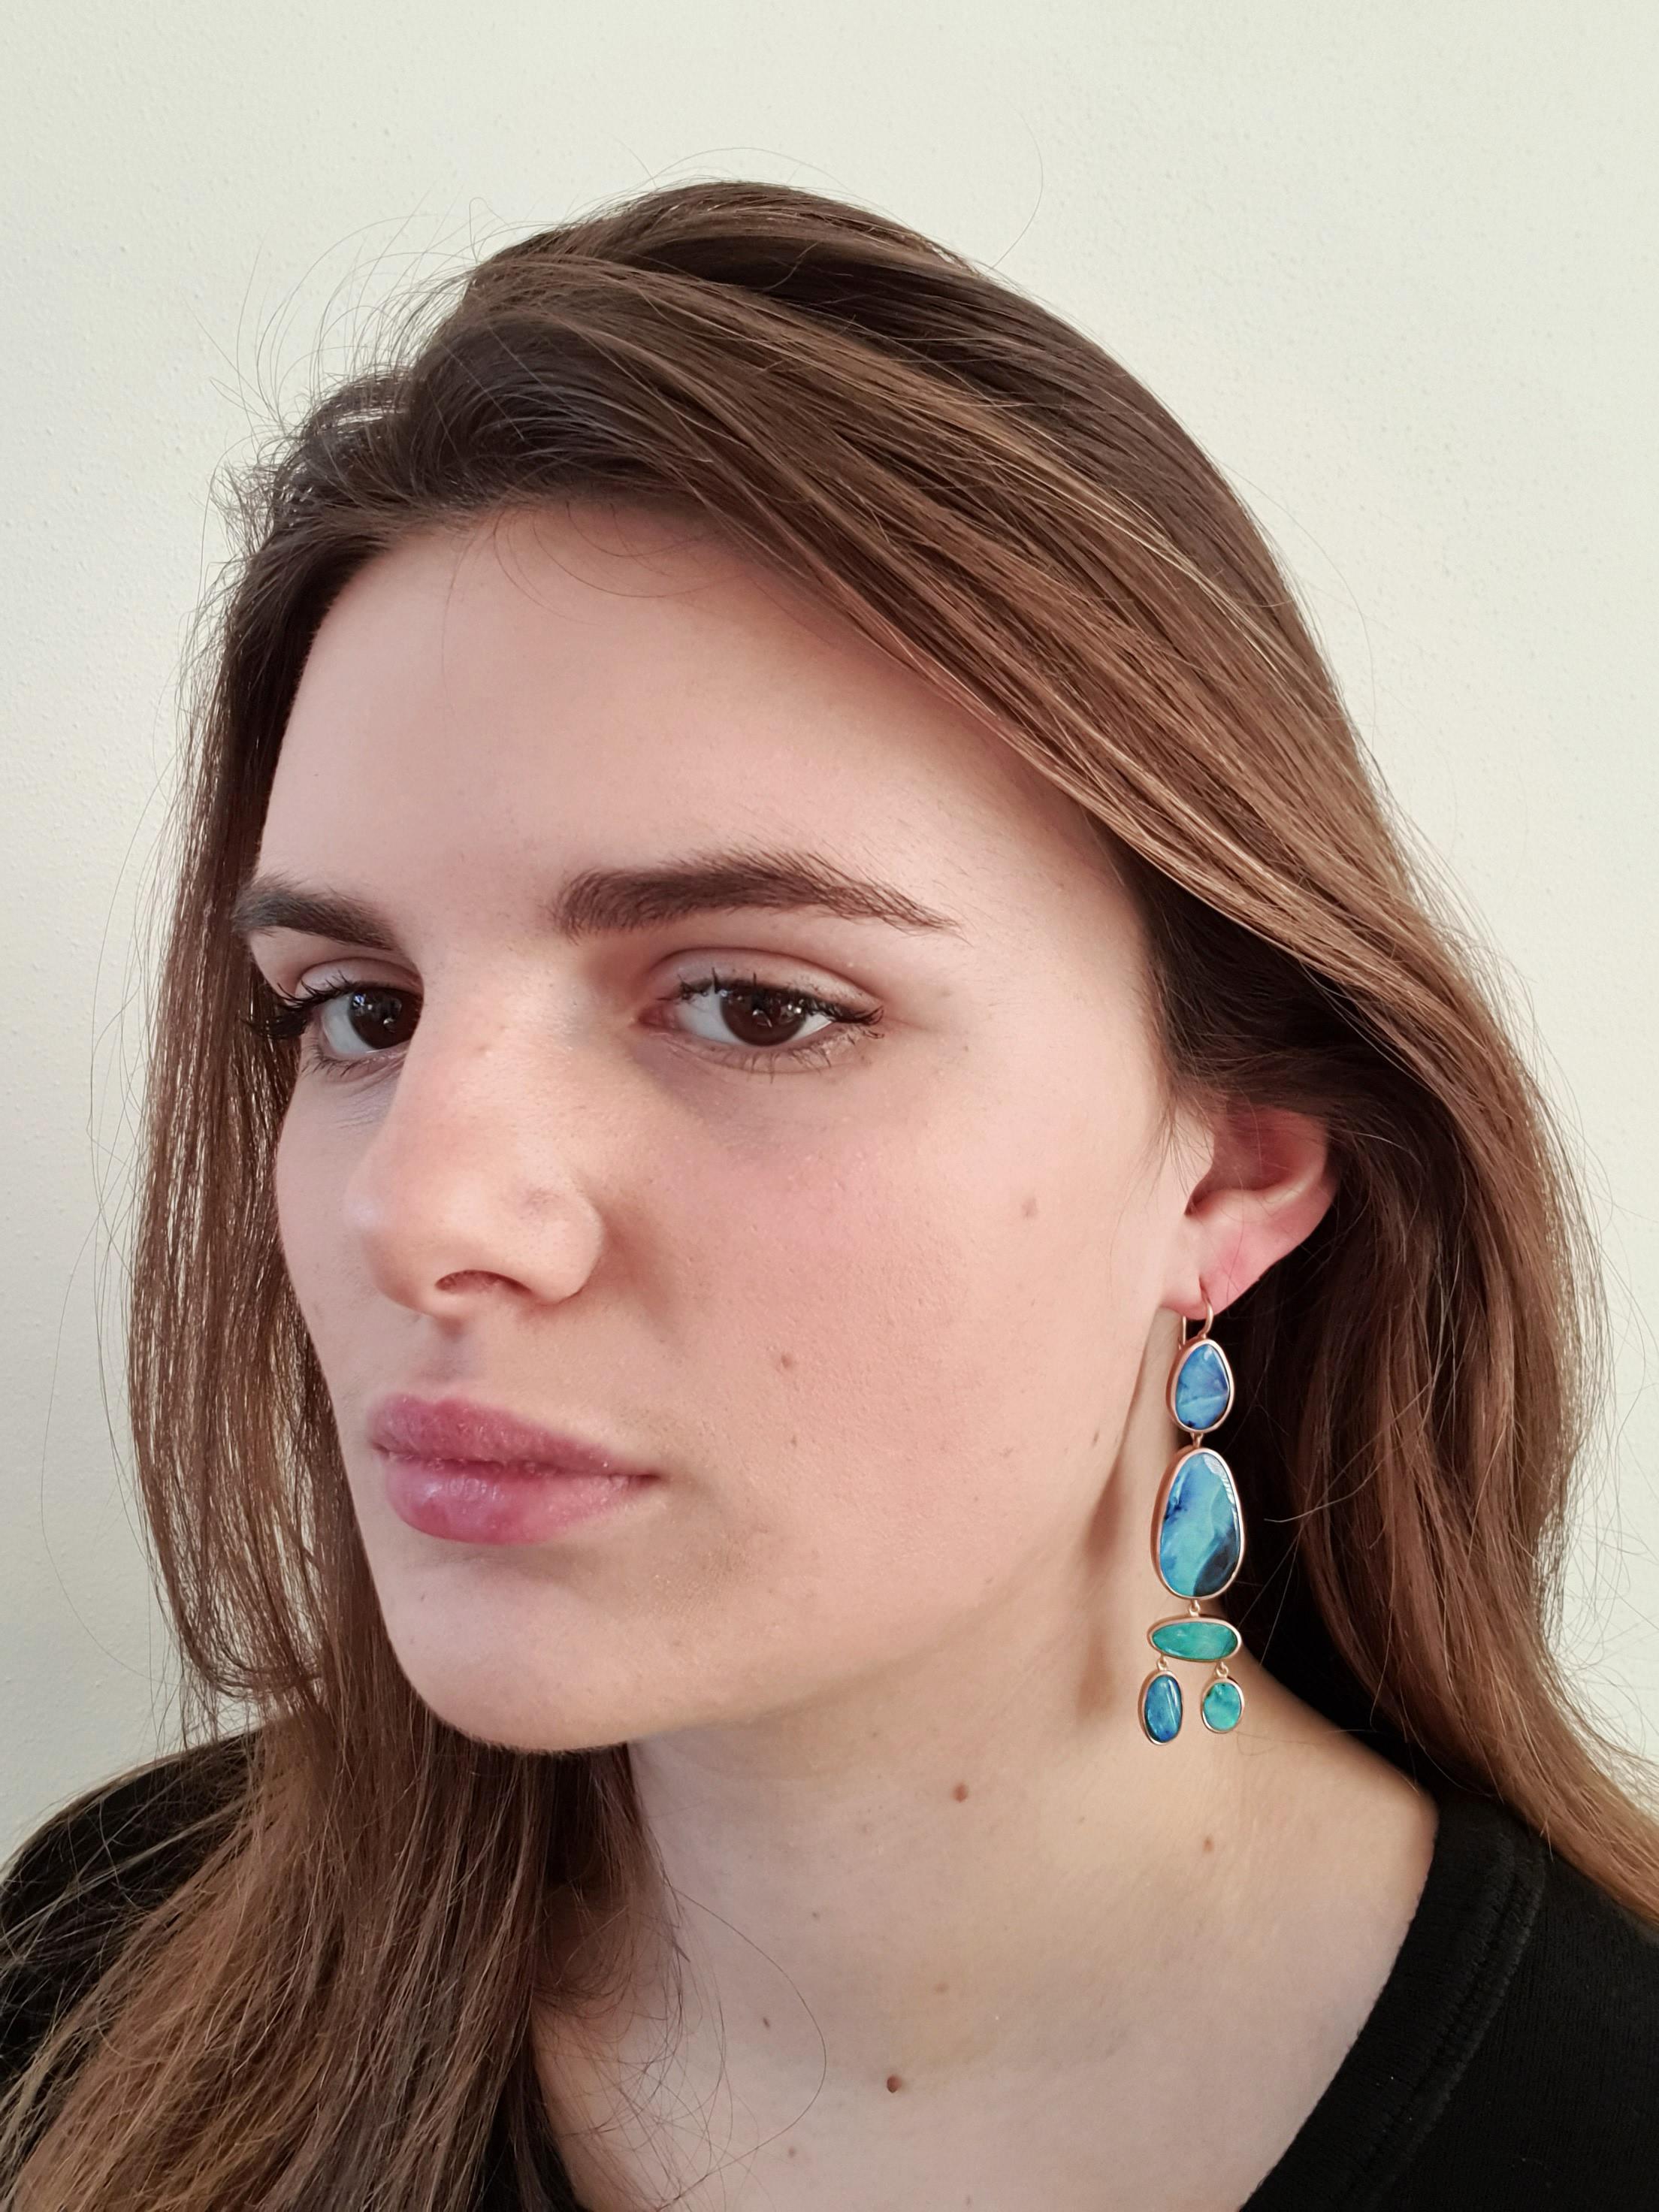 Dalben design One of a kind 18k rose gold matte finishing dangle earrings with 10  light blue bezel set Australian Boulder Opals weighing 28,30 carats.  
max width 14,60 mm 
height without leverback 64 mm
height with leverback 70 mm  
The earrings